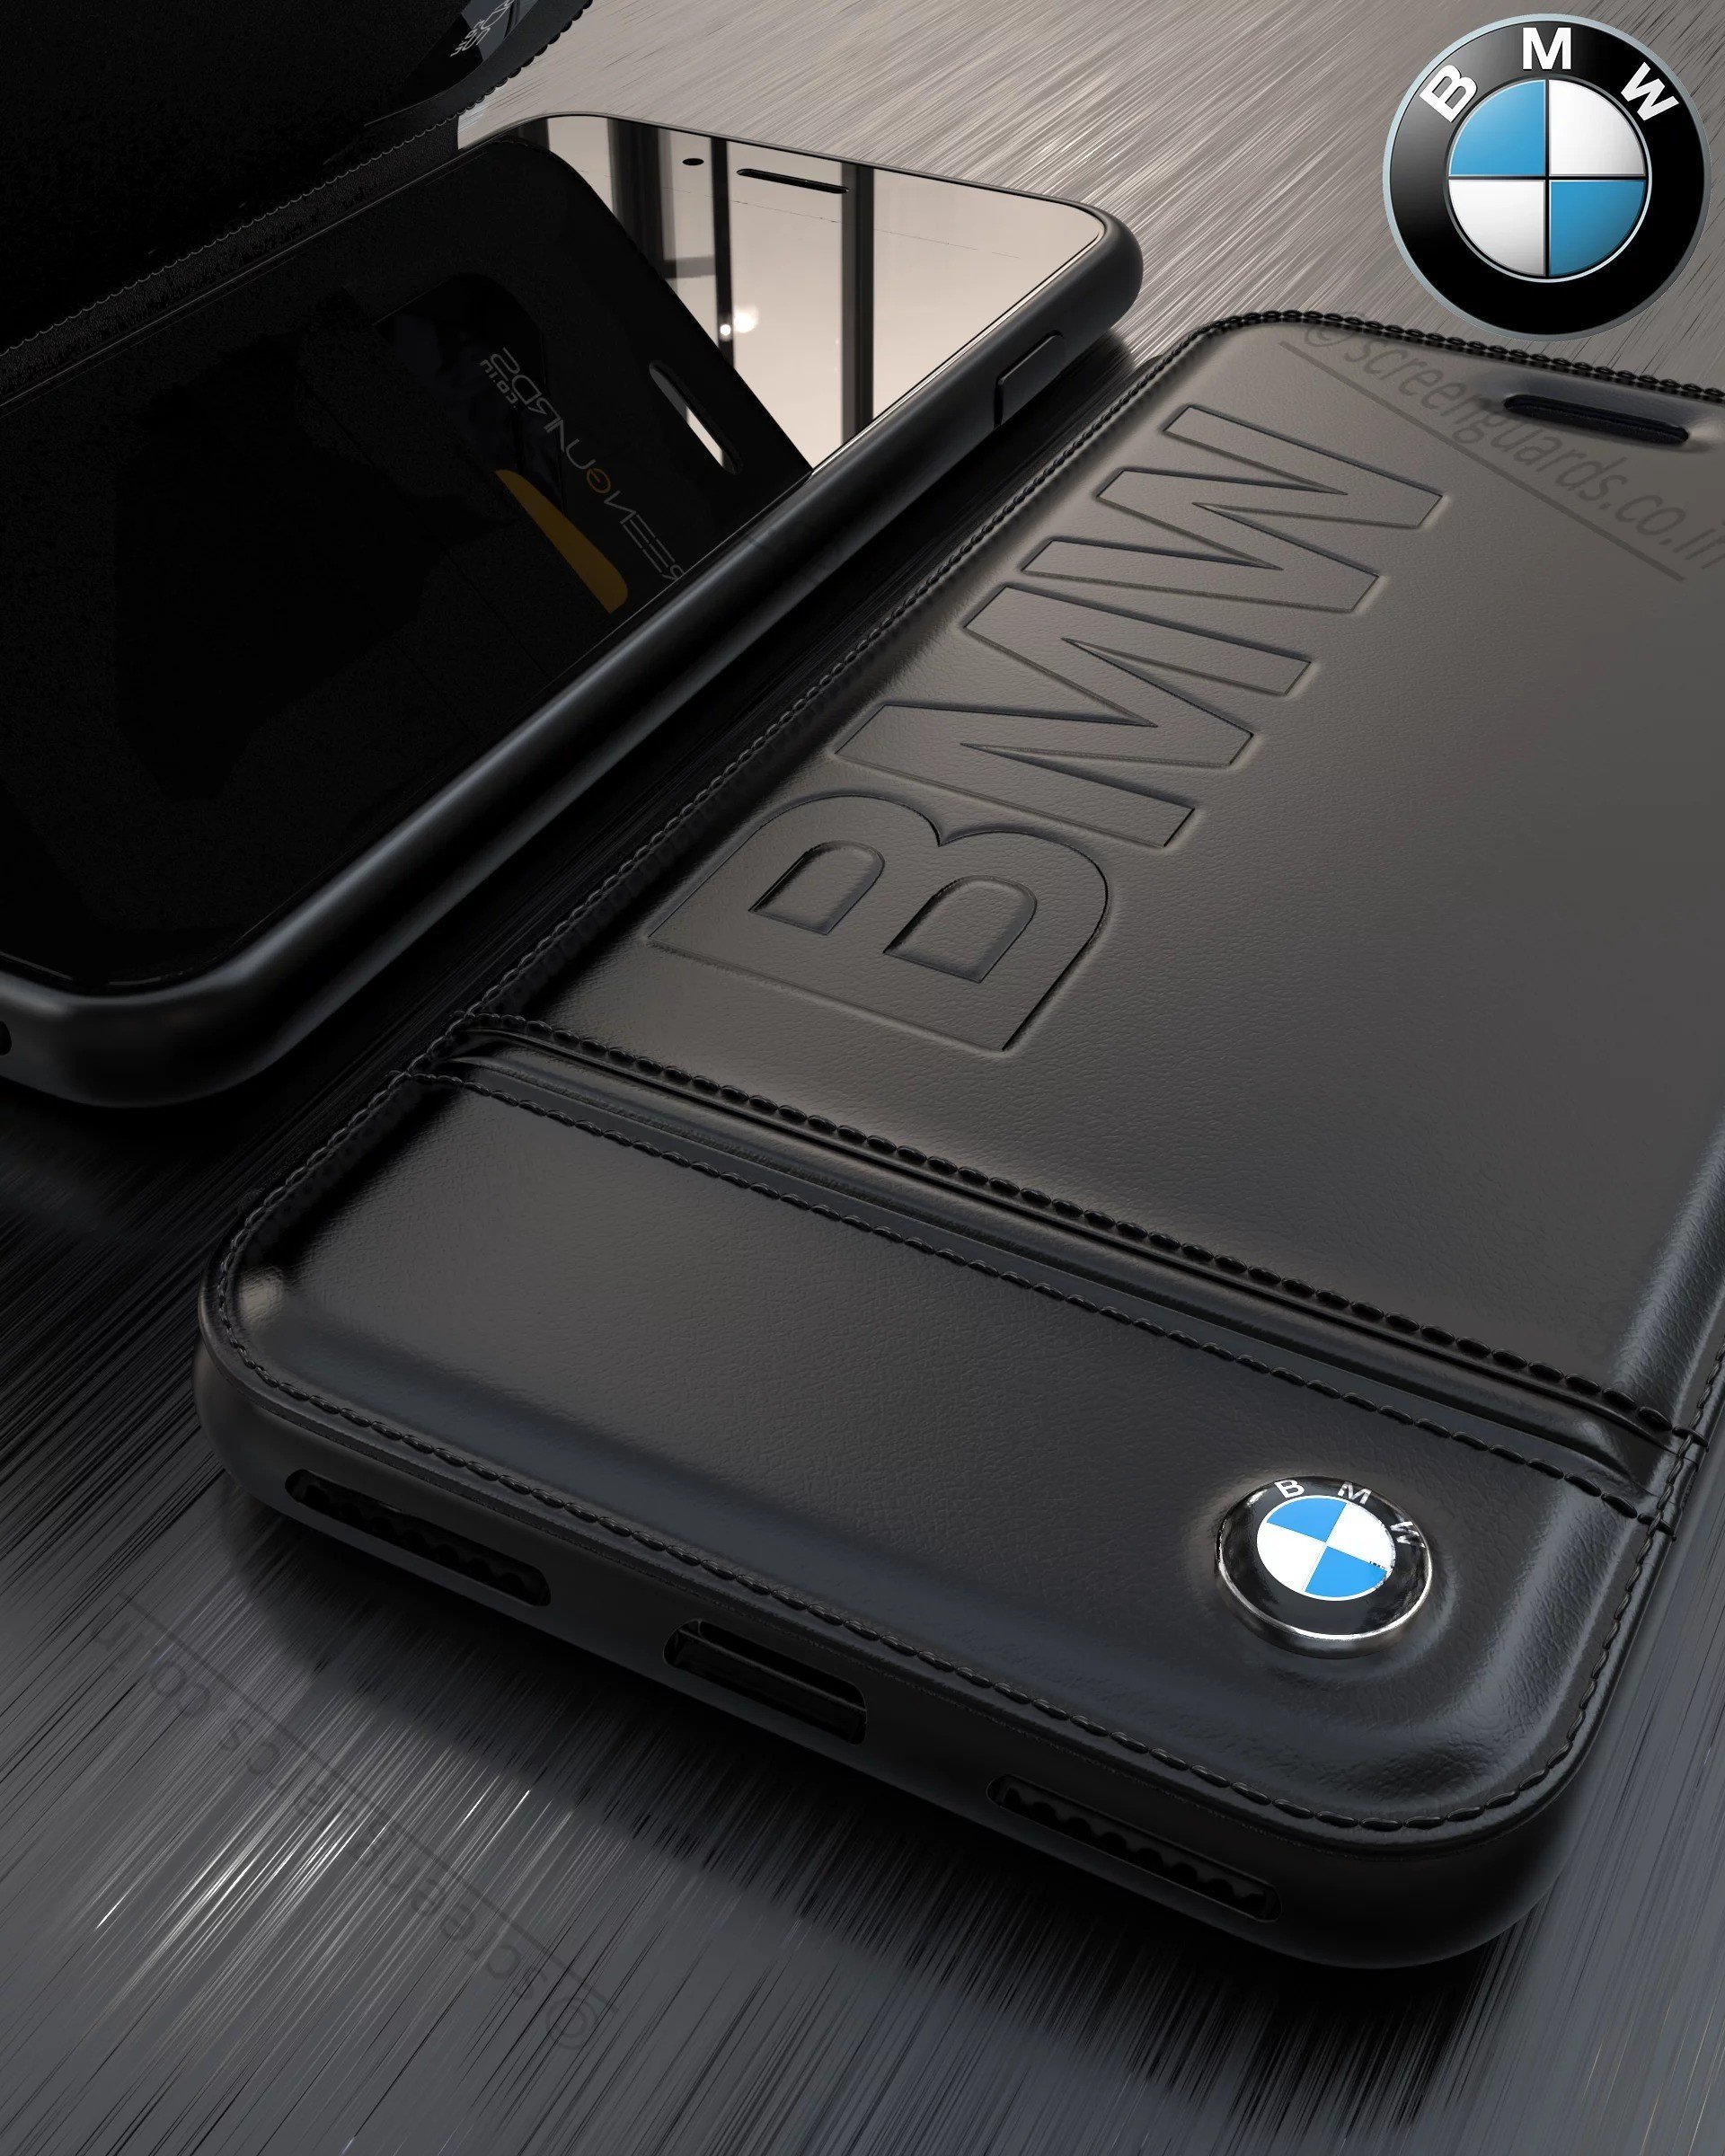 BMW Â® Apple iPhone 8 Flip Official Racing Leather Case Limited Edition